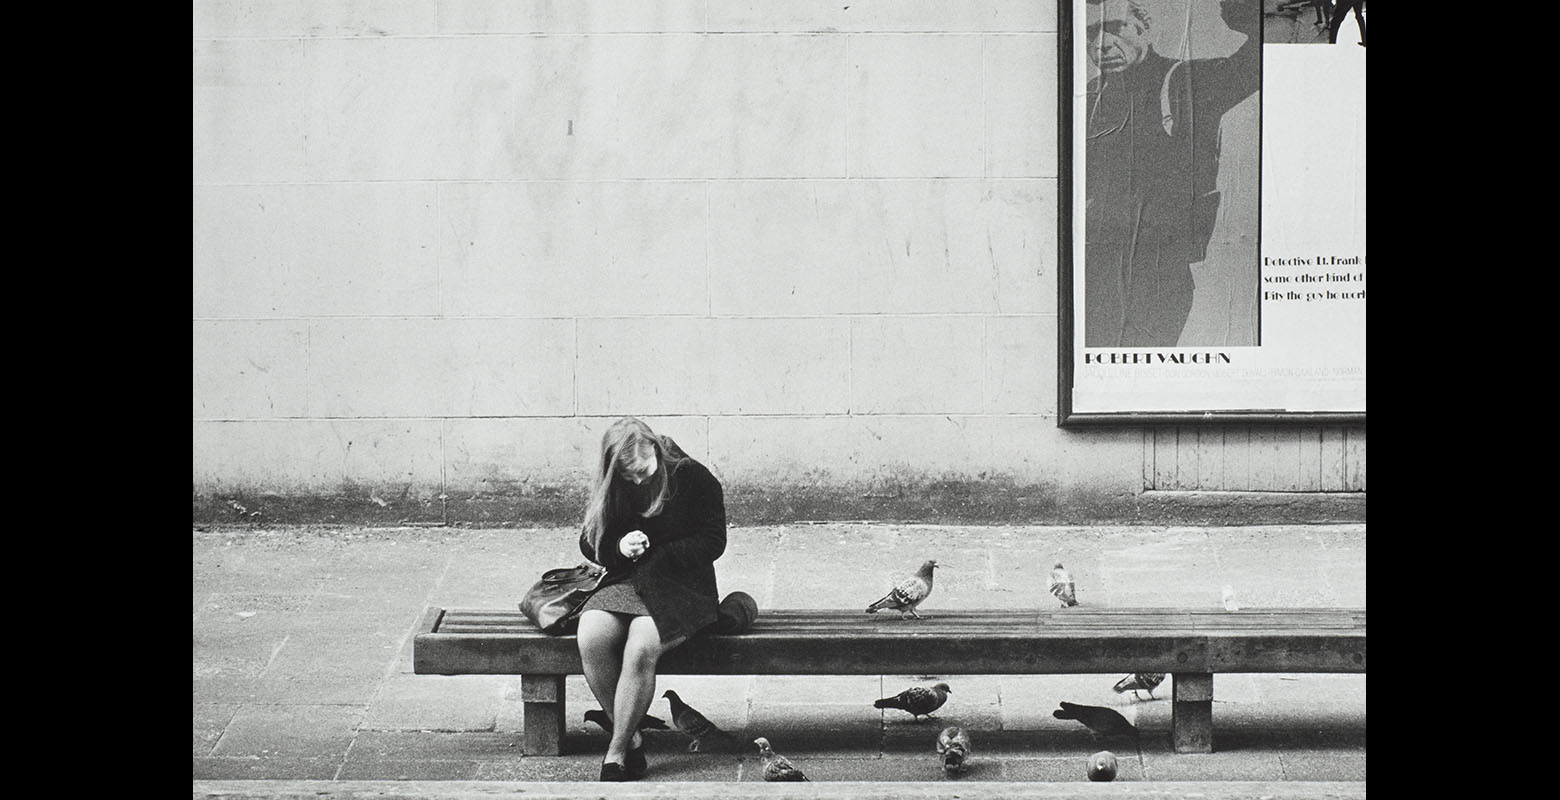 Woman sits on a bench surrounded by pigeons. Behind her on a wall is a poster for a film